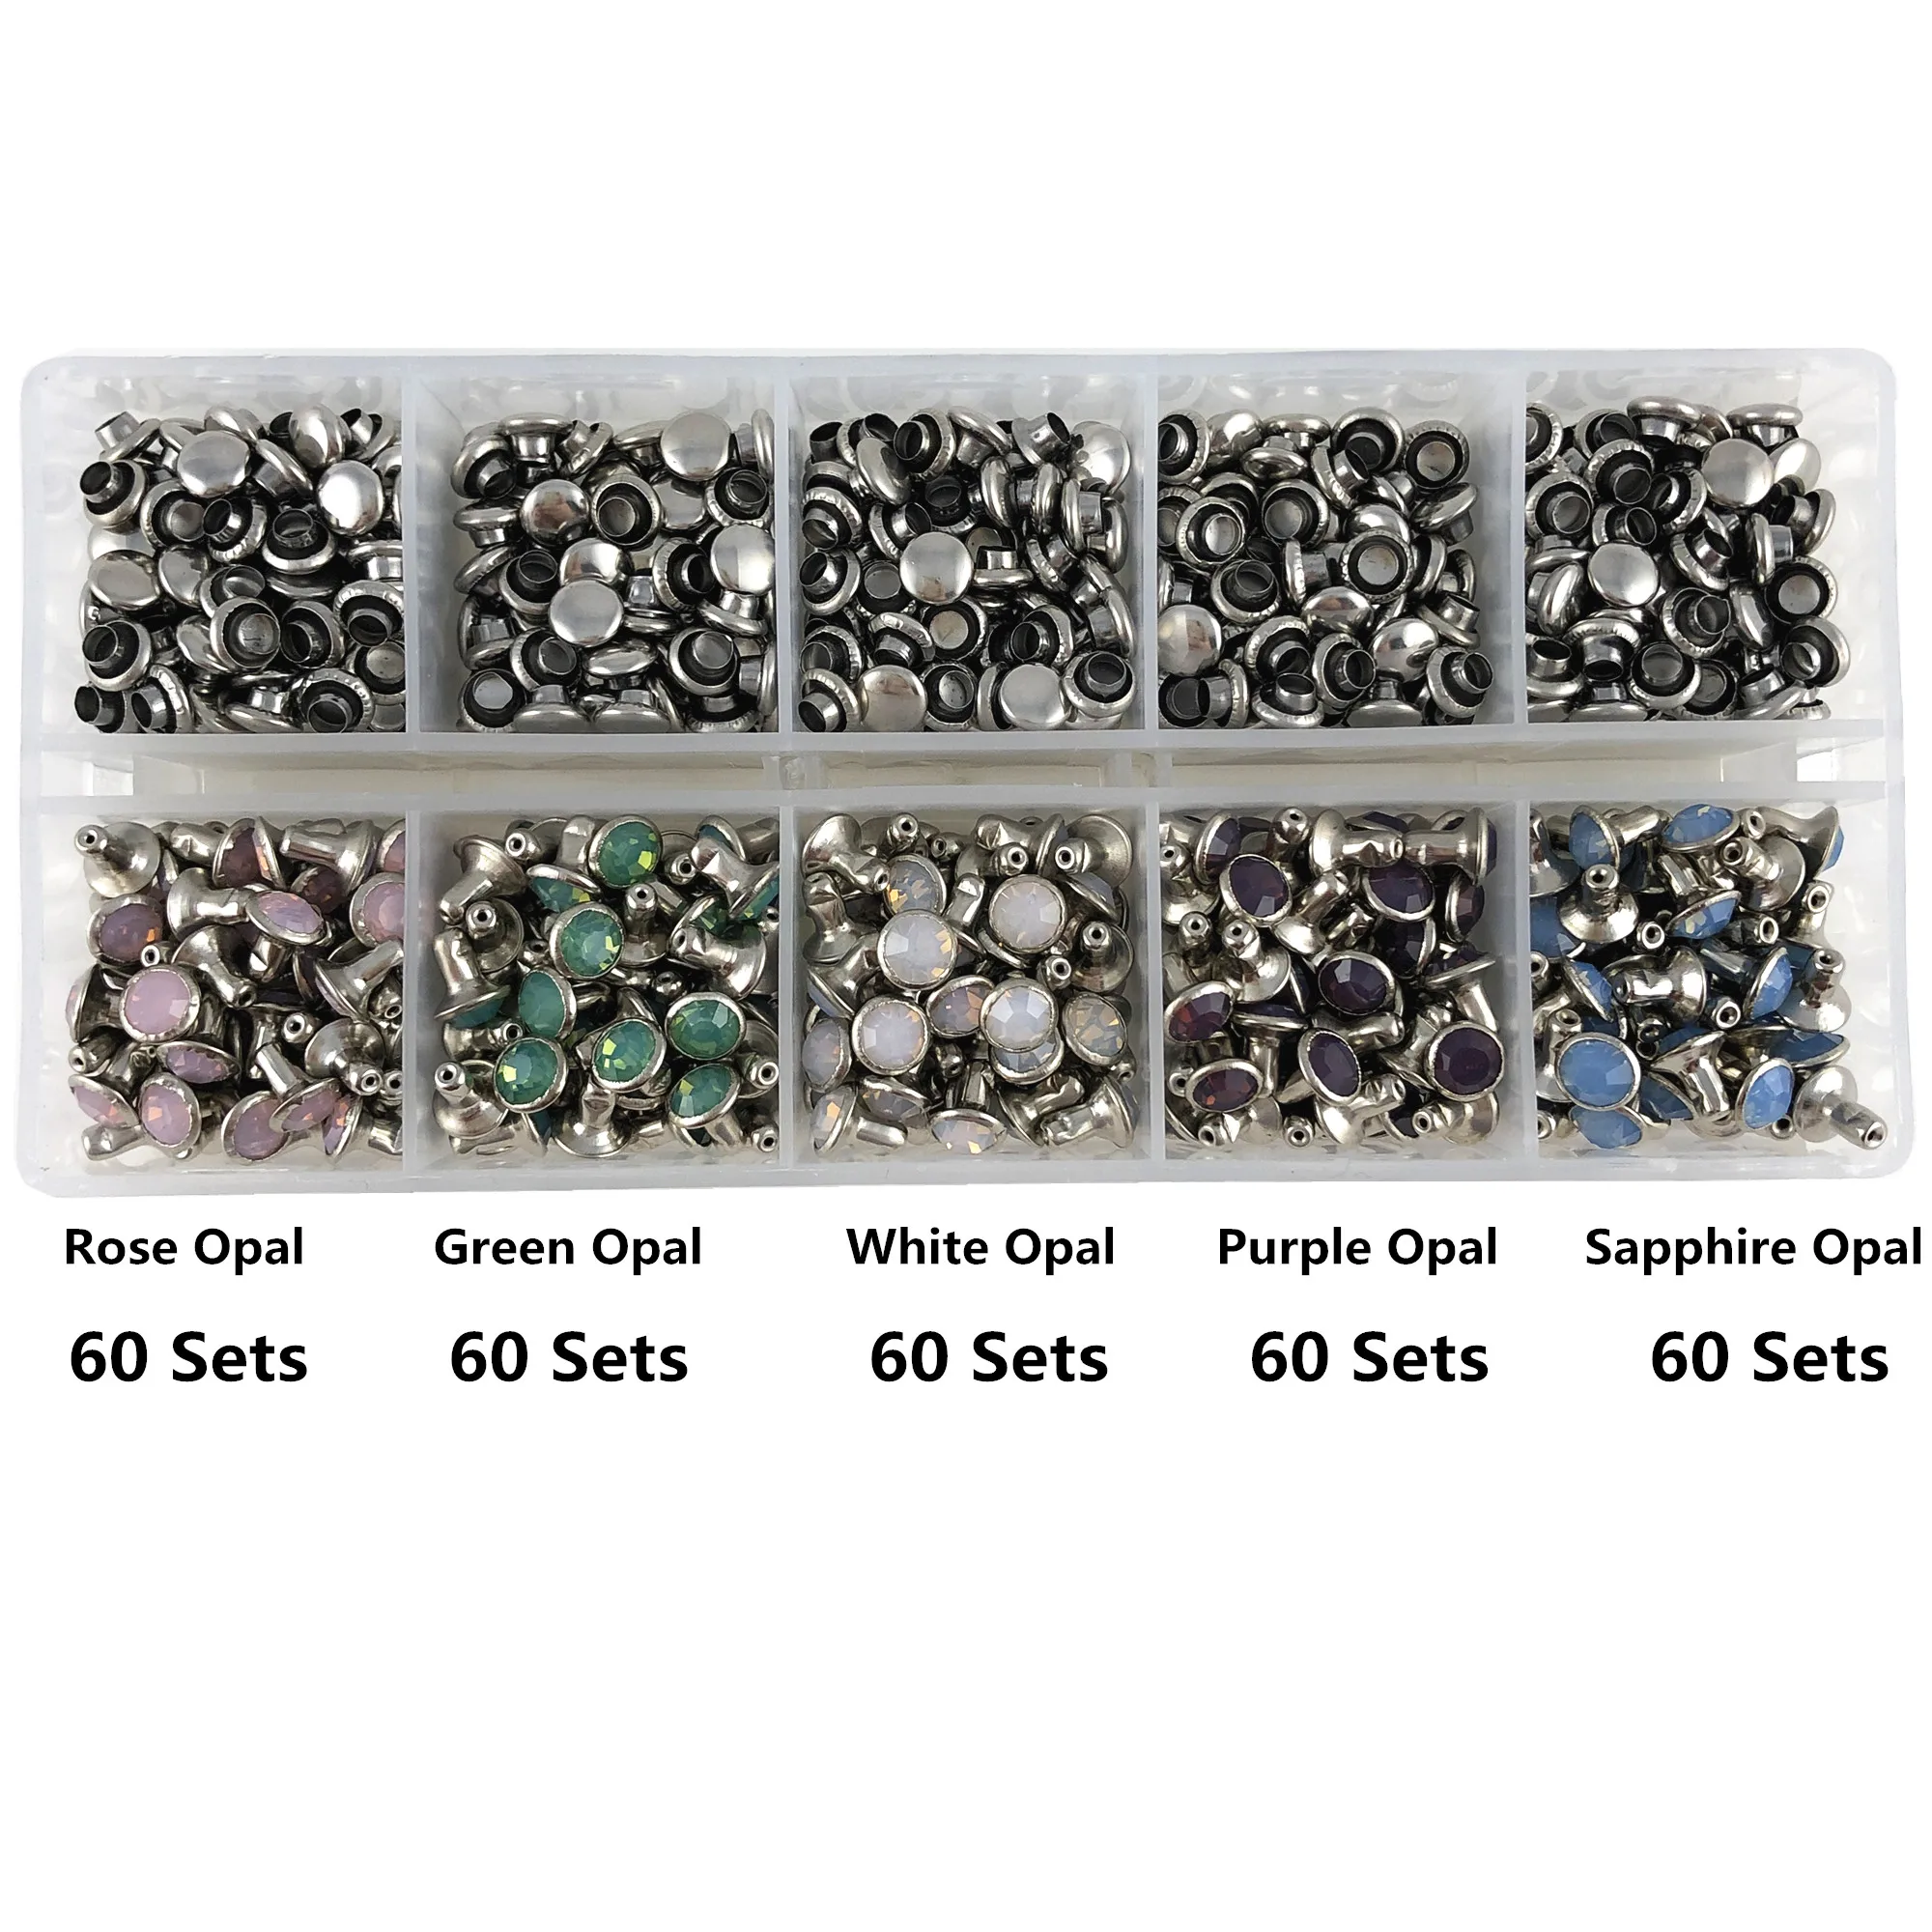 

YORANYO 300 Sets 6MM CZ++ Opal Crystal Rivets Silver Plated Mixed Color Spots Studs Double Cap for DIY Leathercraft Making